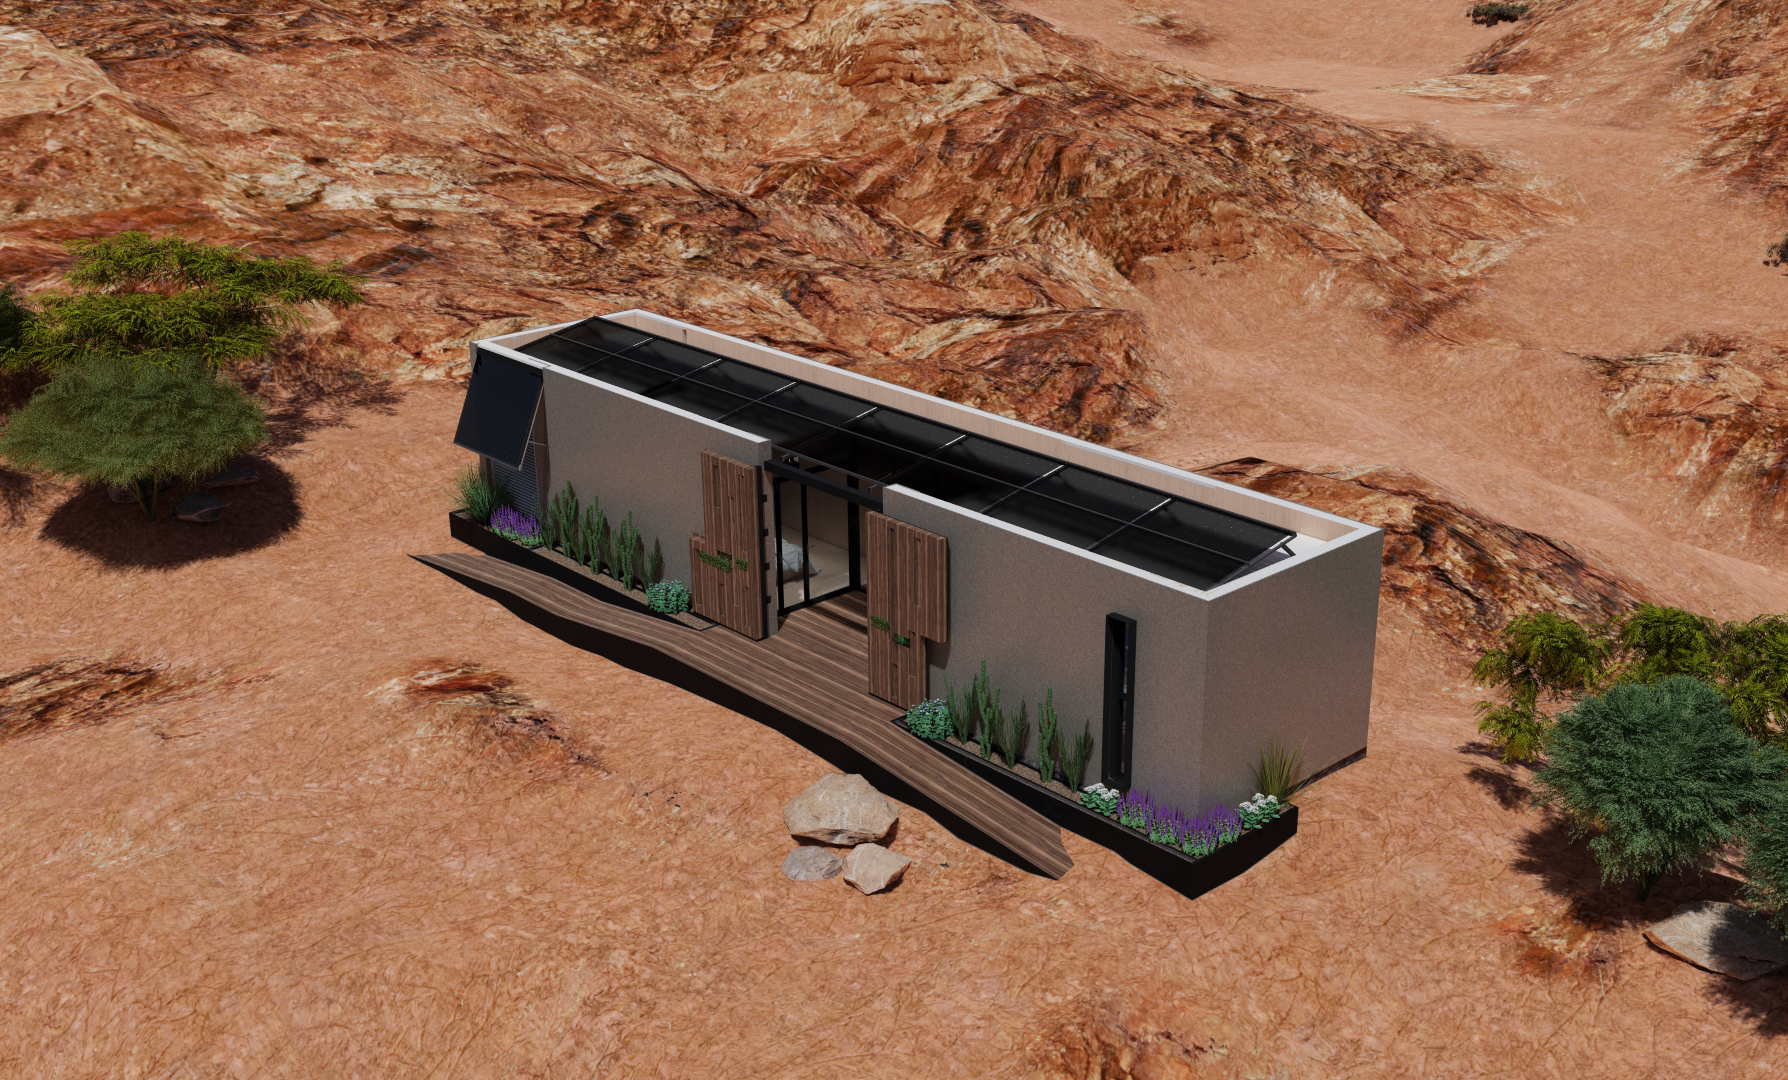 A rendering of the Mojave Bloom house